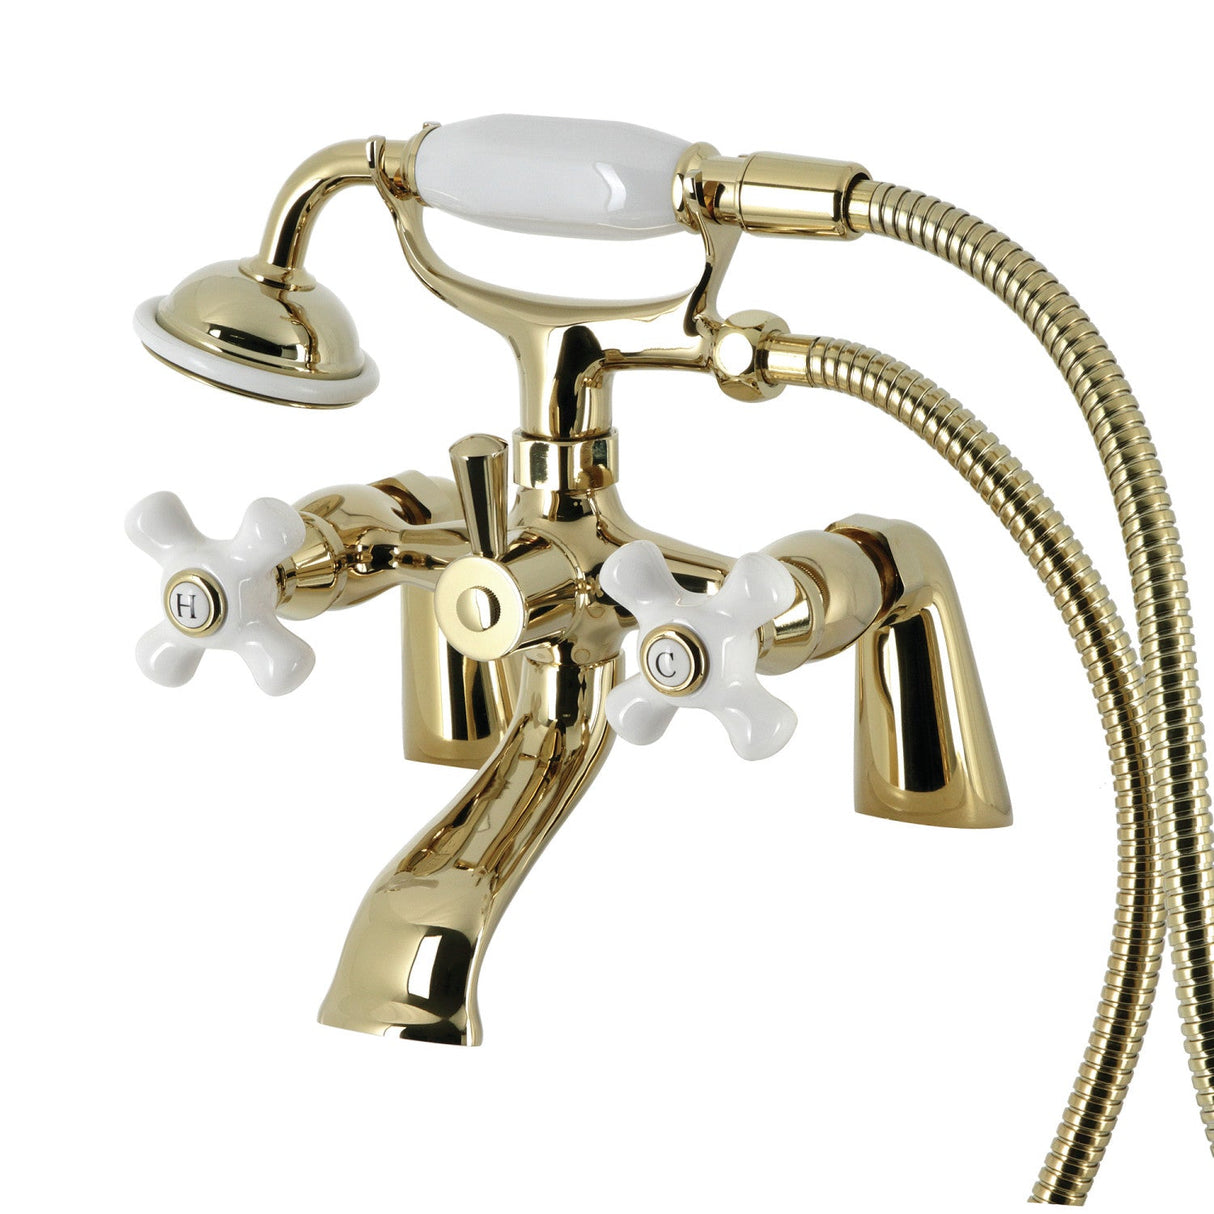 Kingston KS267PXPB Three-Handle 2-Hole Deck Mount Clawfoot Tub Faucet with Hand Shower, Polished Brass